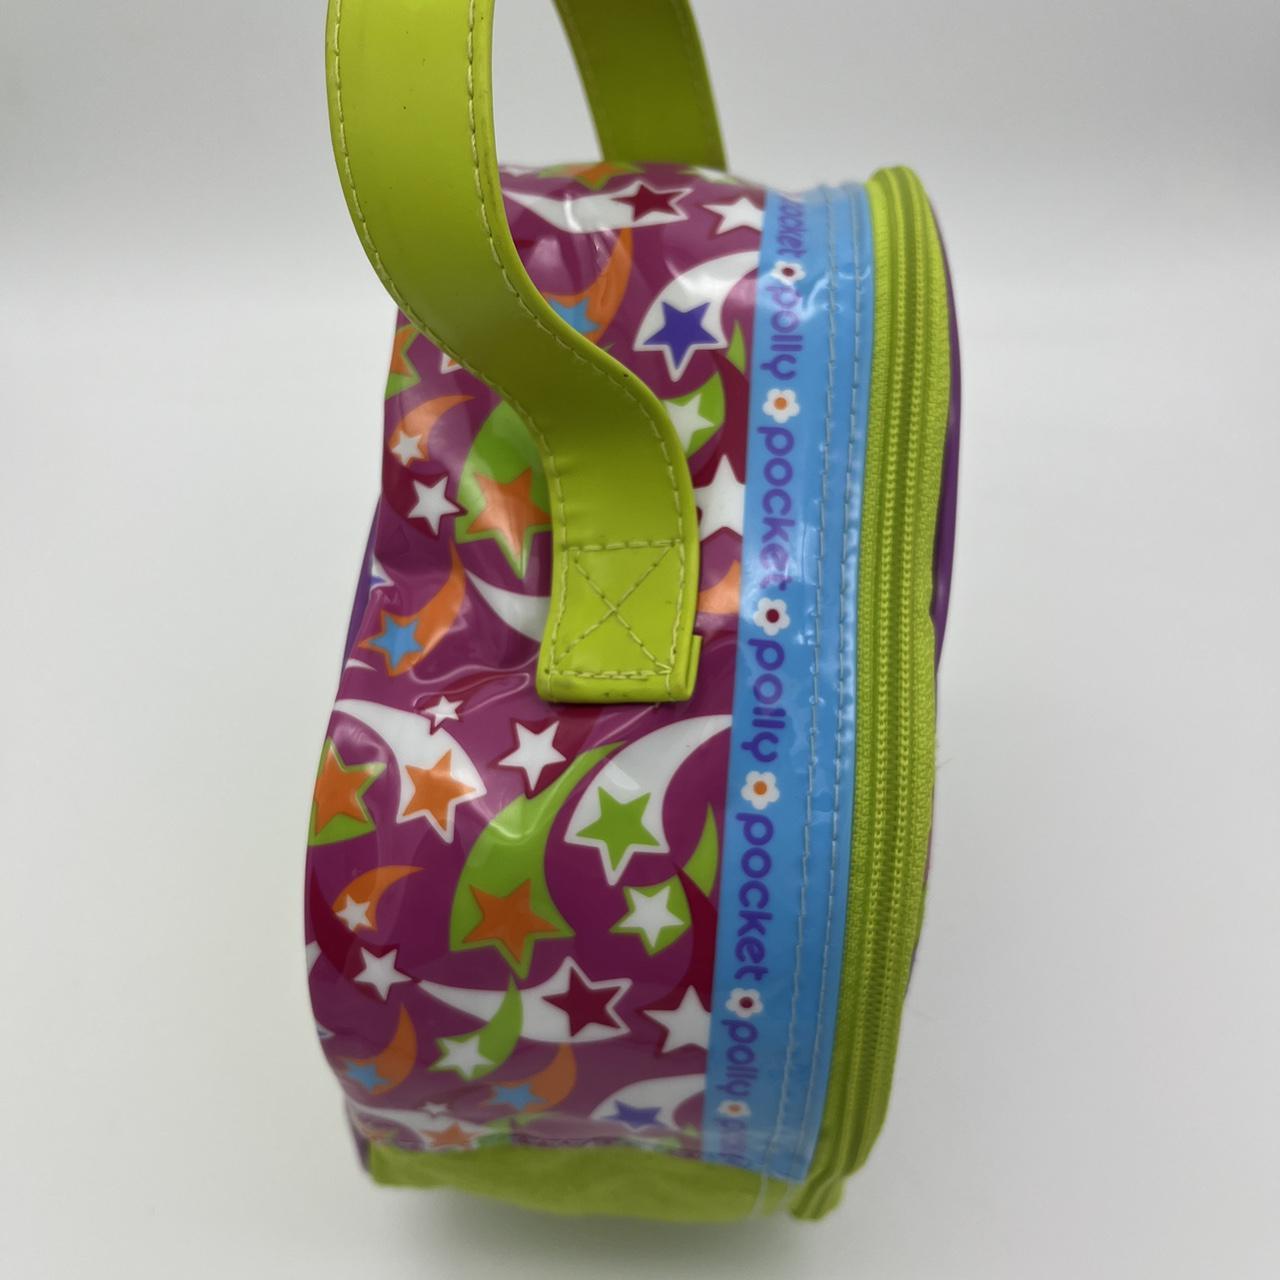 Product Image 2 - Vintage Polly Pocket Purse

•Vintage Polly